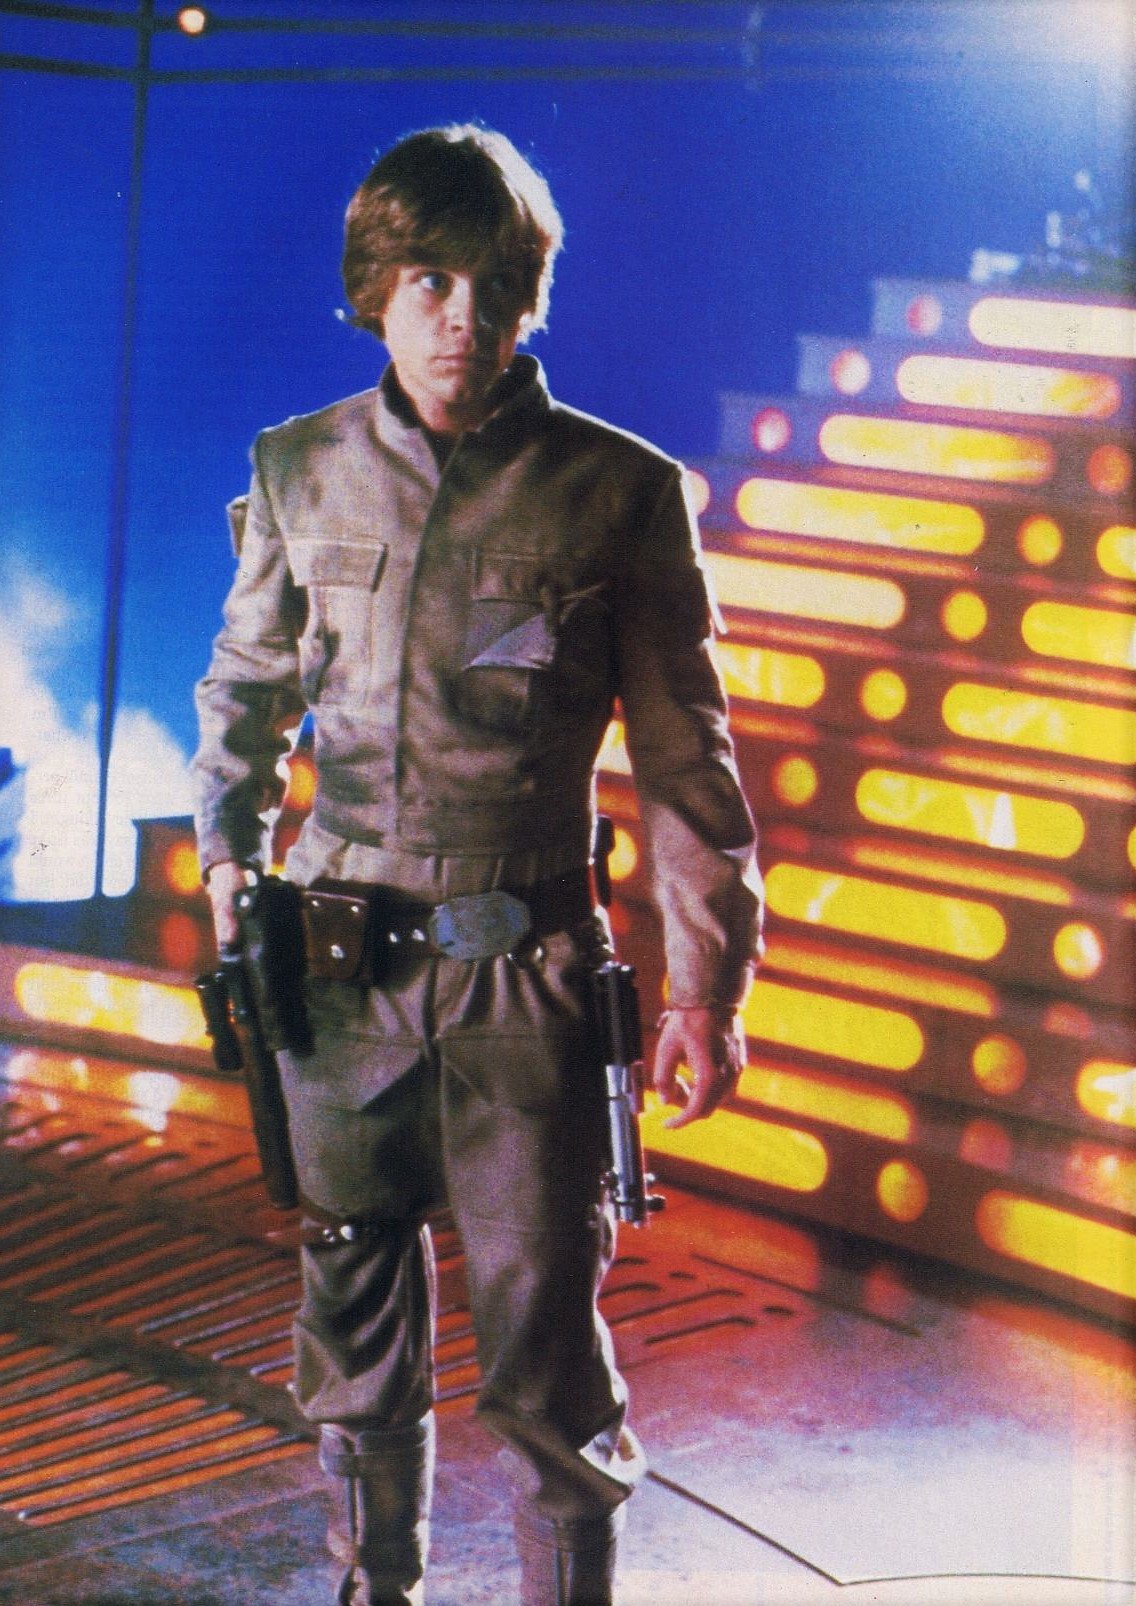 movie - Hot Toys Star Wars Luke Skywalker Bespin DX24 Review and Fun, updated Dd46f2651ec496af73e038acd09bcd20c9f507e0